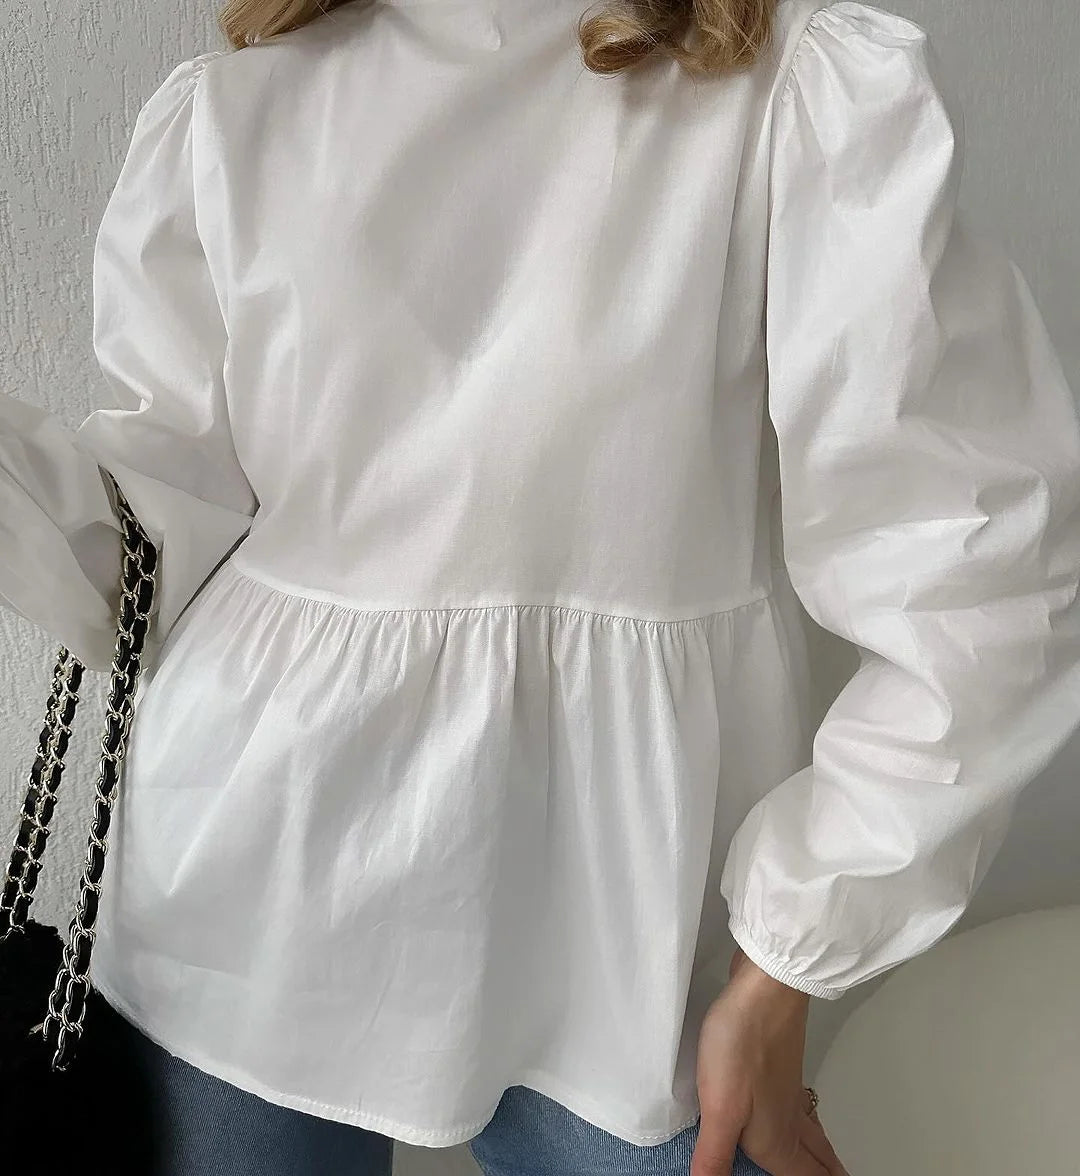 Puff Long Sleeves with Ties Blouse Shirt